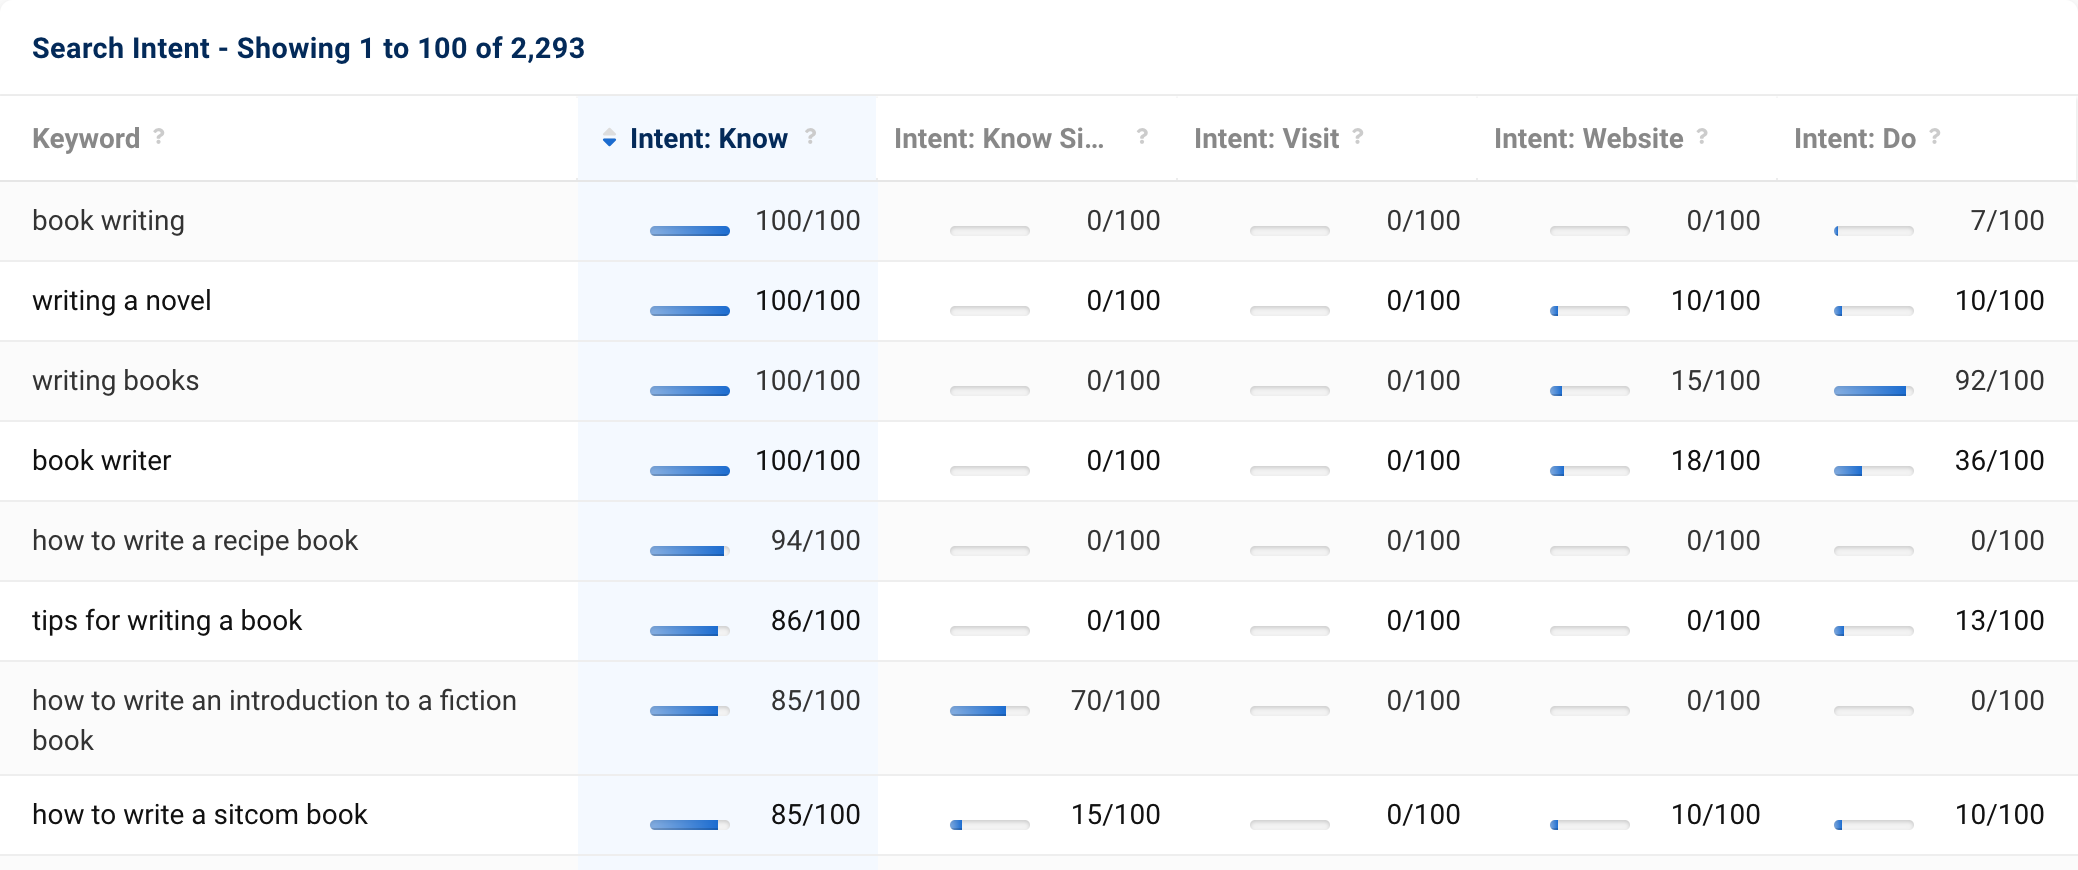 The table on the overview page of the search intent analysis of lists in SISTRIX. For each intent, ratings of 0 to 100 are given for each keyword in the list. The keyword - book writing - is searched with a rating of 100 points with the intent Know, for example. The keyword - writing a novel - with 100 points for the intent Know, 10 points for the intent Website and 10 points for the intent Do.